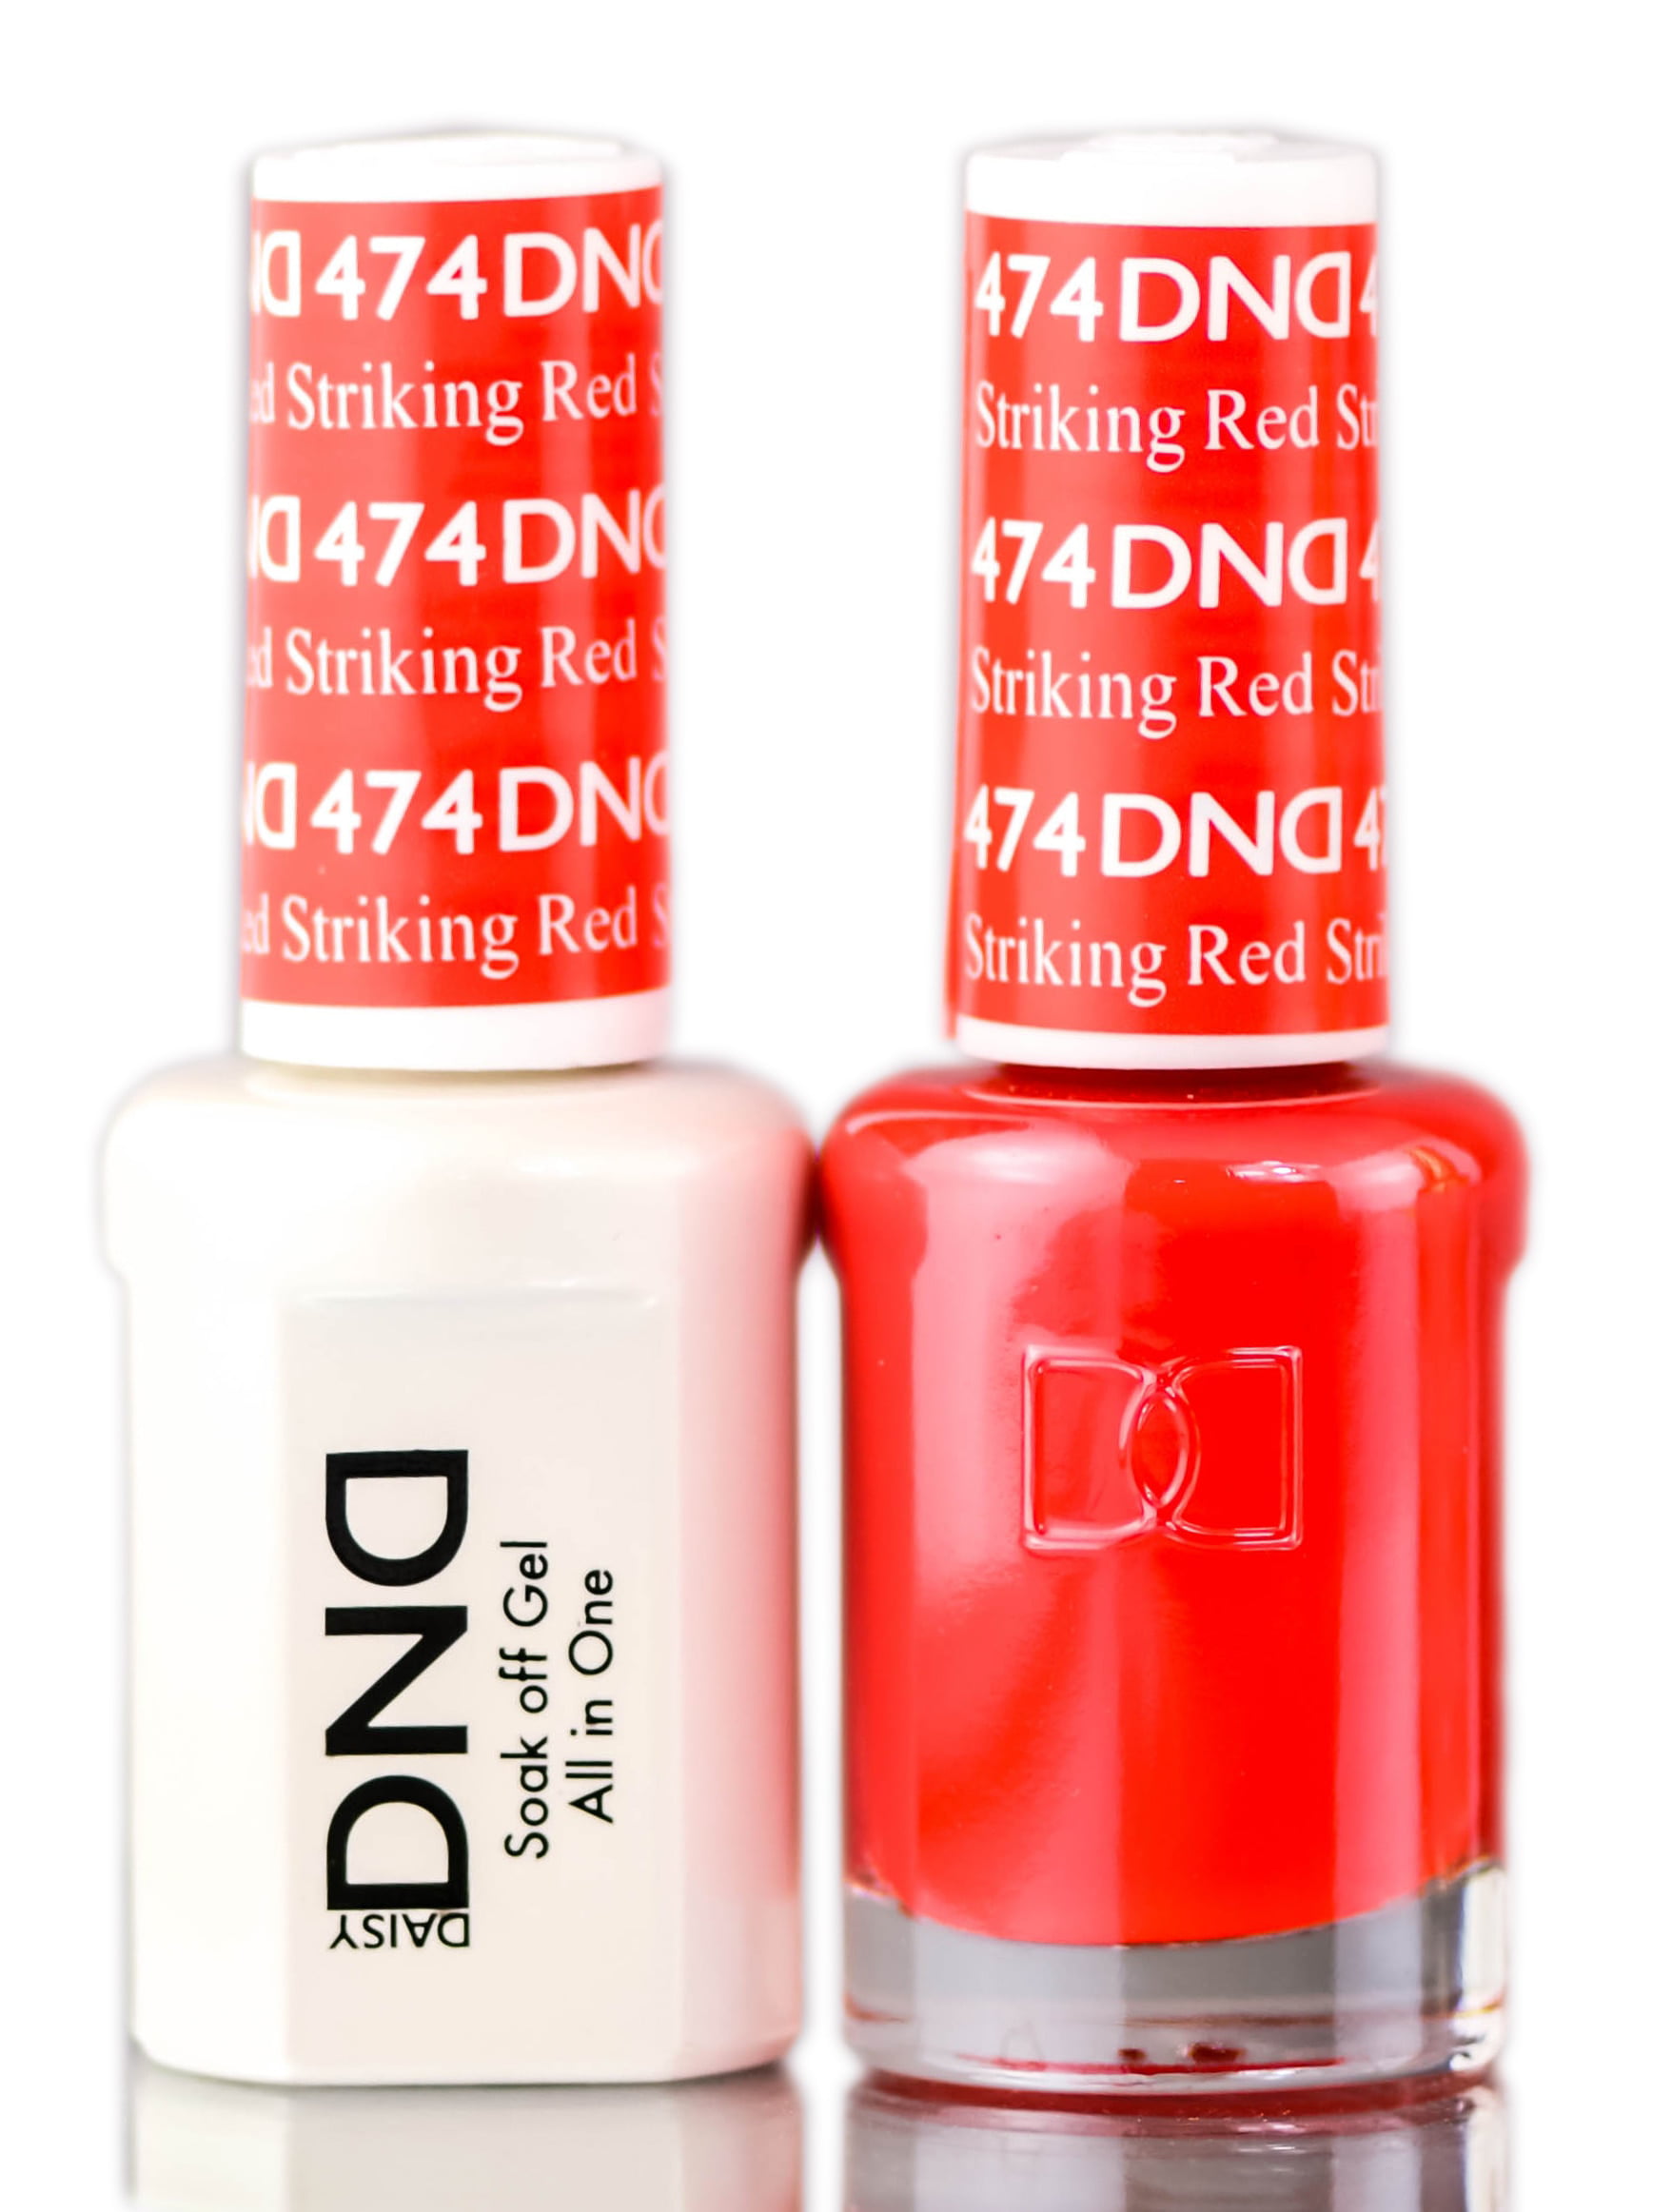 Daisy Dnd Reds Soak Off Gel Polish Duo All In One Gel Lacquer